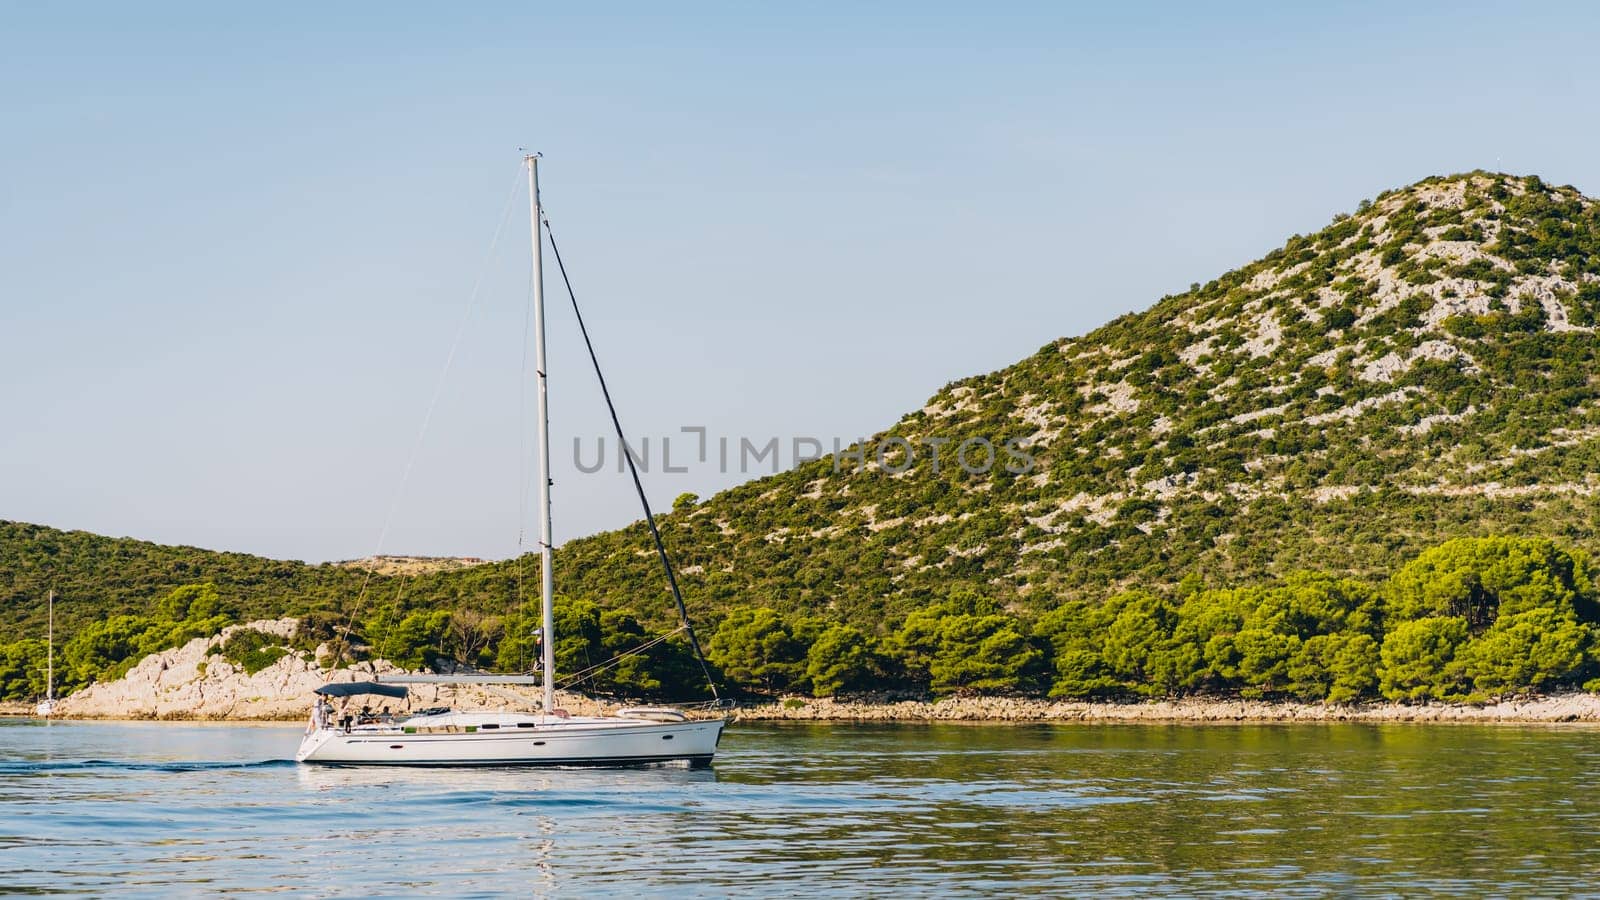 Modern yacht with tourists sailing off in Adriatic Sea, Croatia by Popov